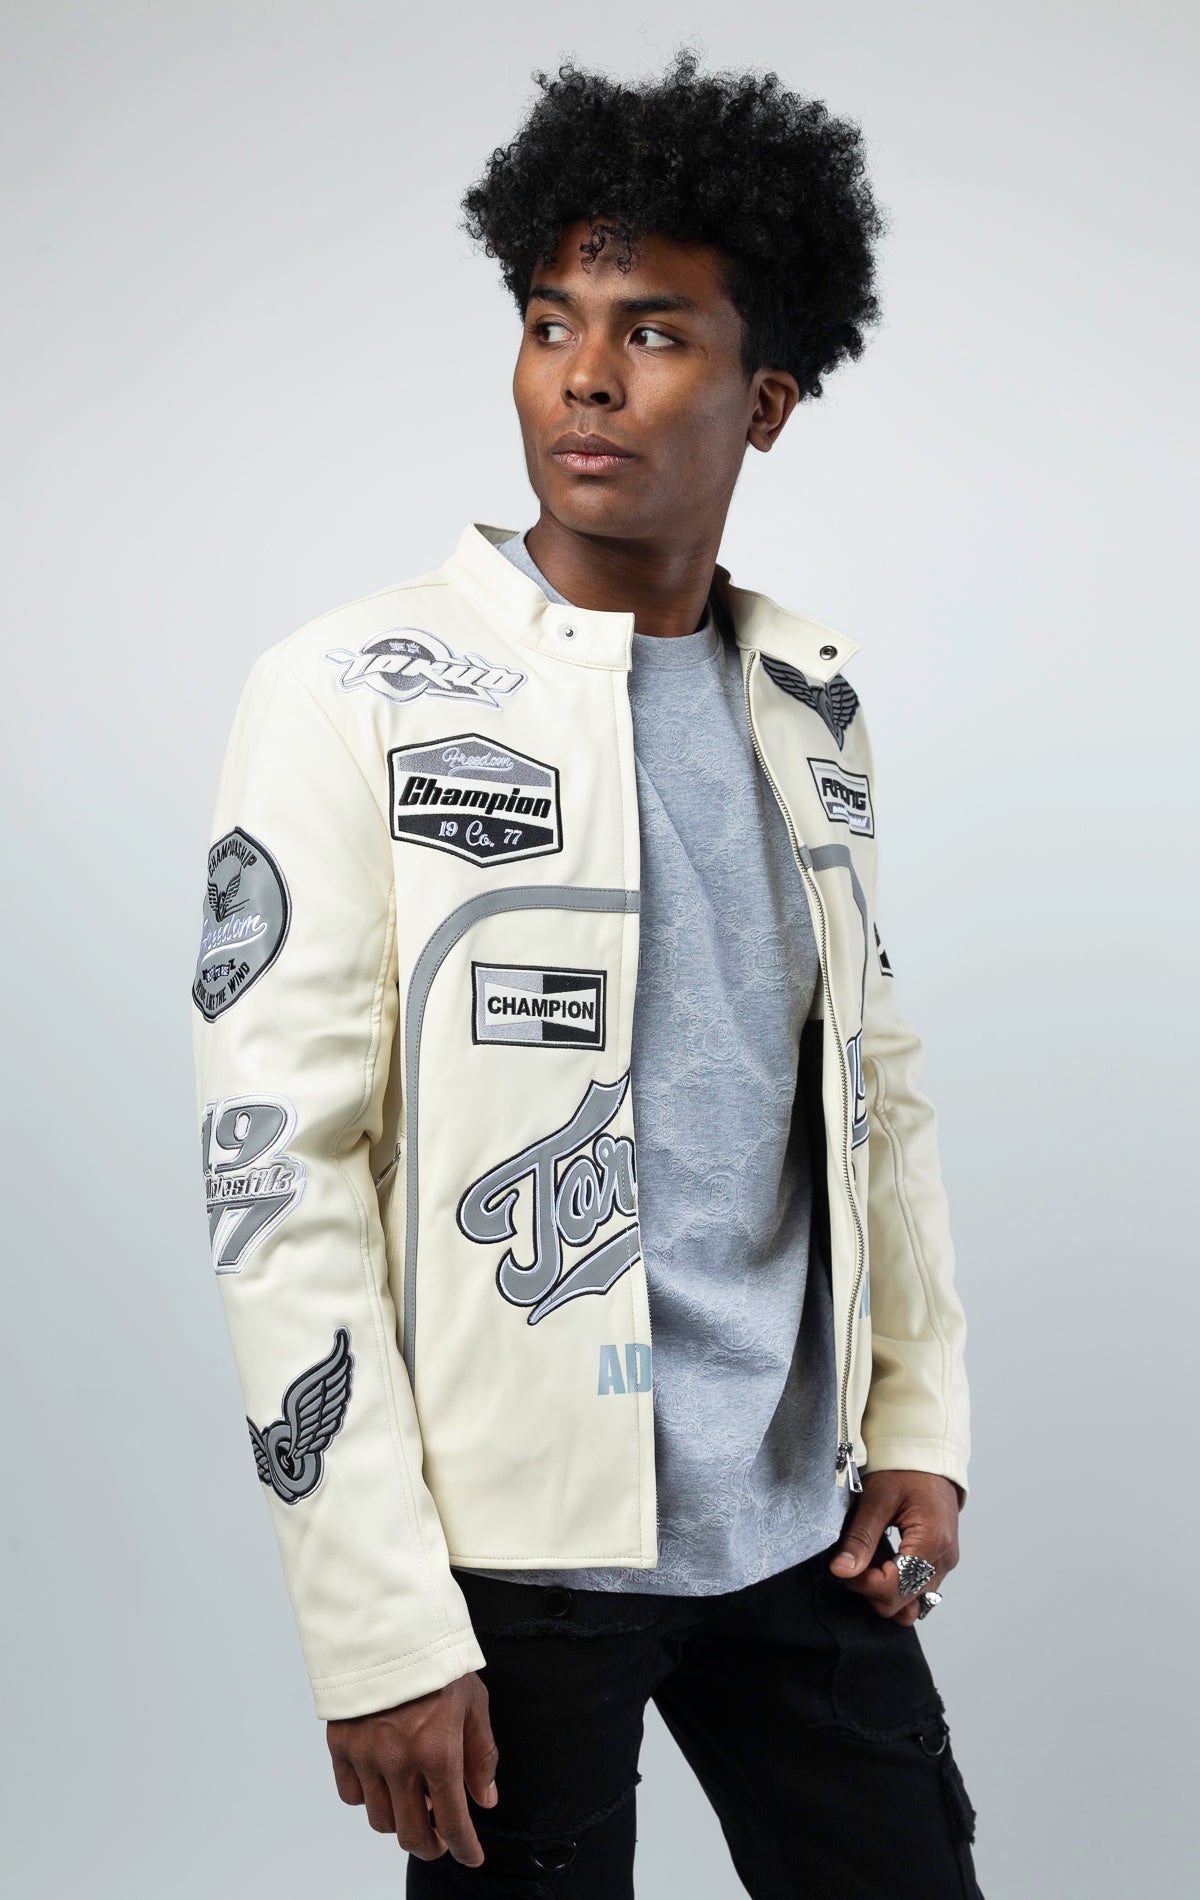 Cream Leather motorcycle jacket featuring a bold "Speedster" graphic on the back. This varsity style jacket includes ribbed cuffs and collar, and a sleek silver zipper closure